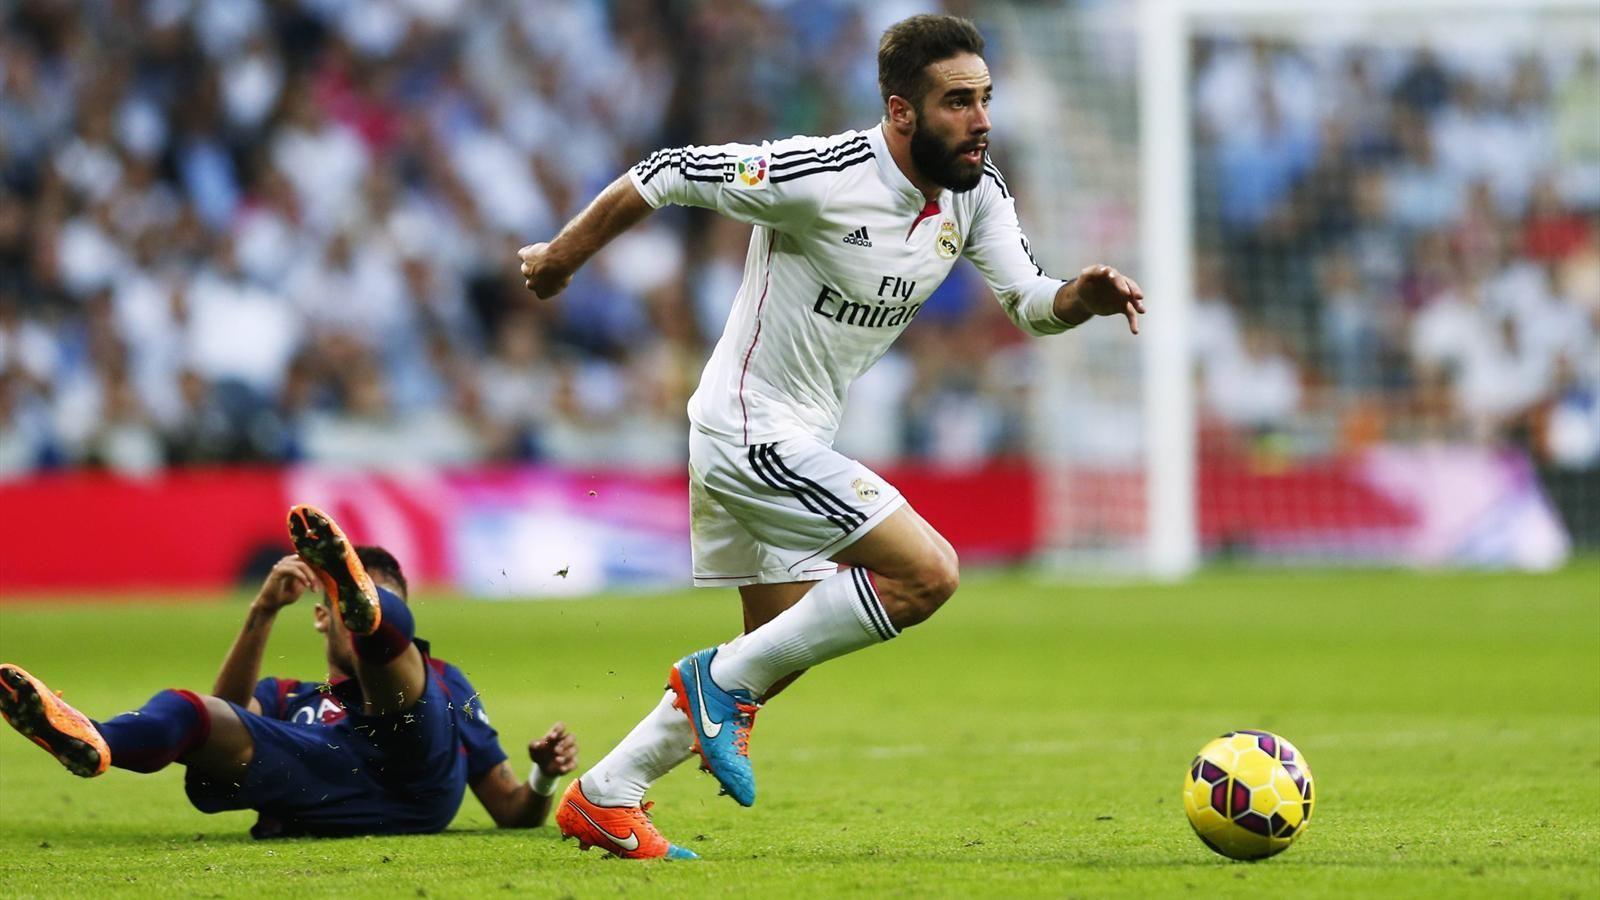 Real Madrid extend Dani Carvajal's contract until 2020